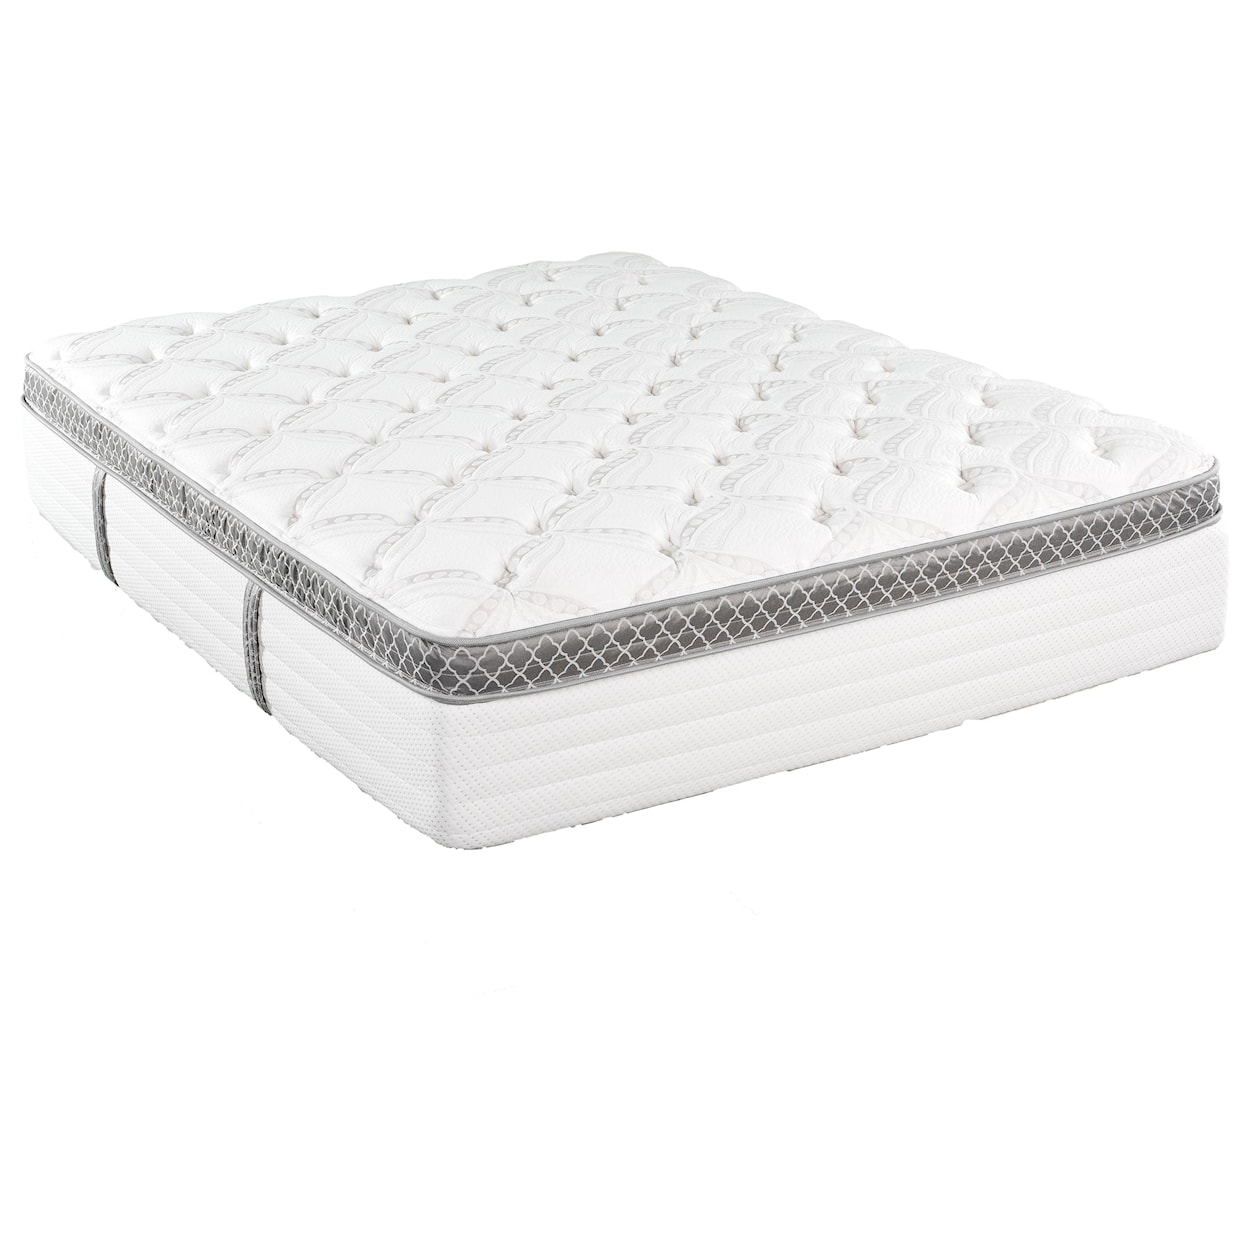 King Koil Madelyn Pillow Top Full Pillow Top Pocketed Coil Mattress